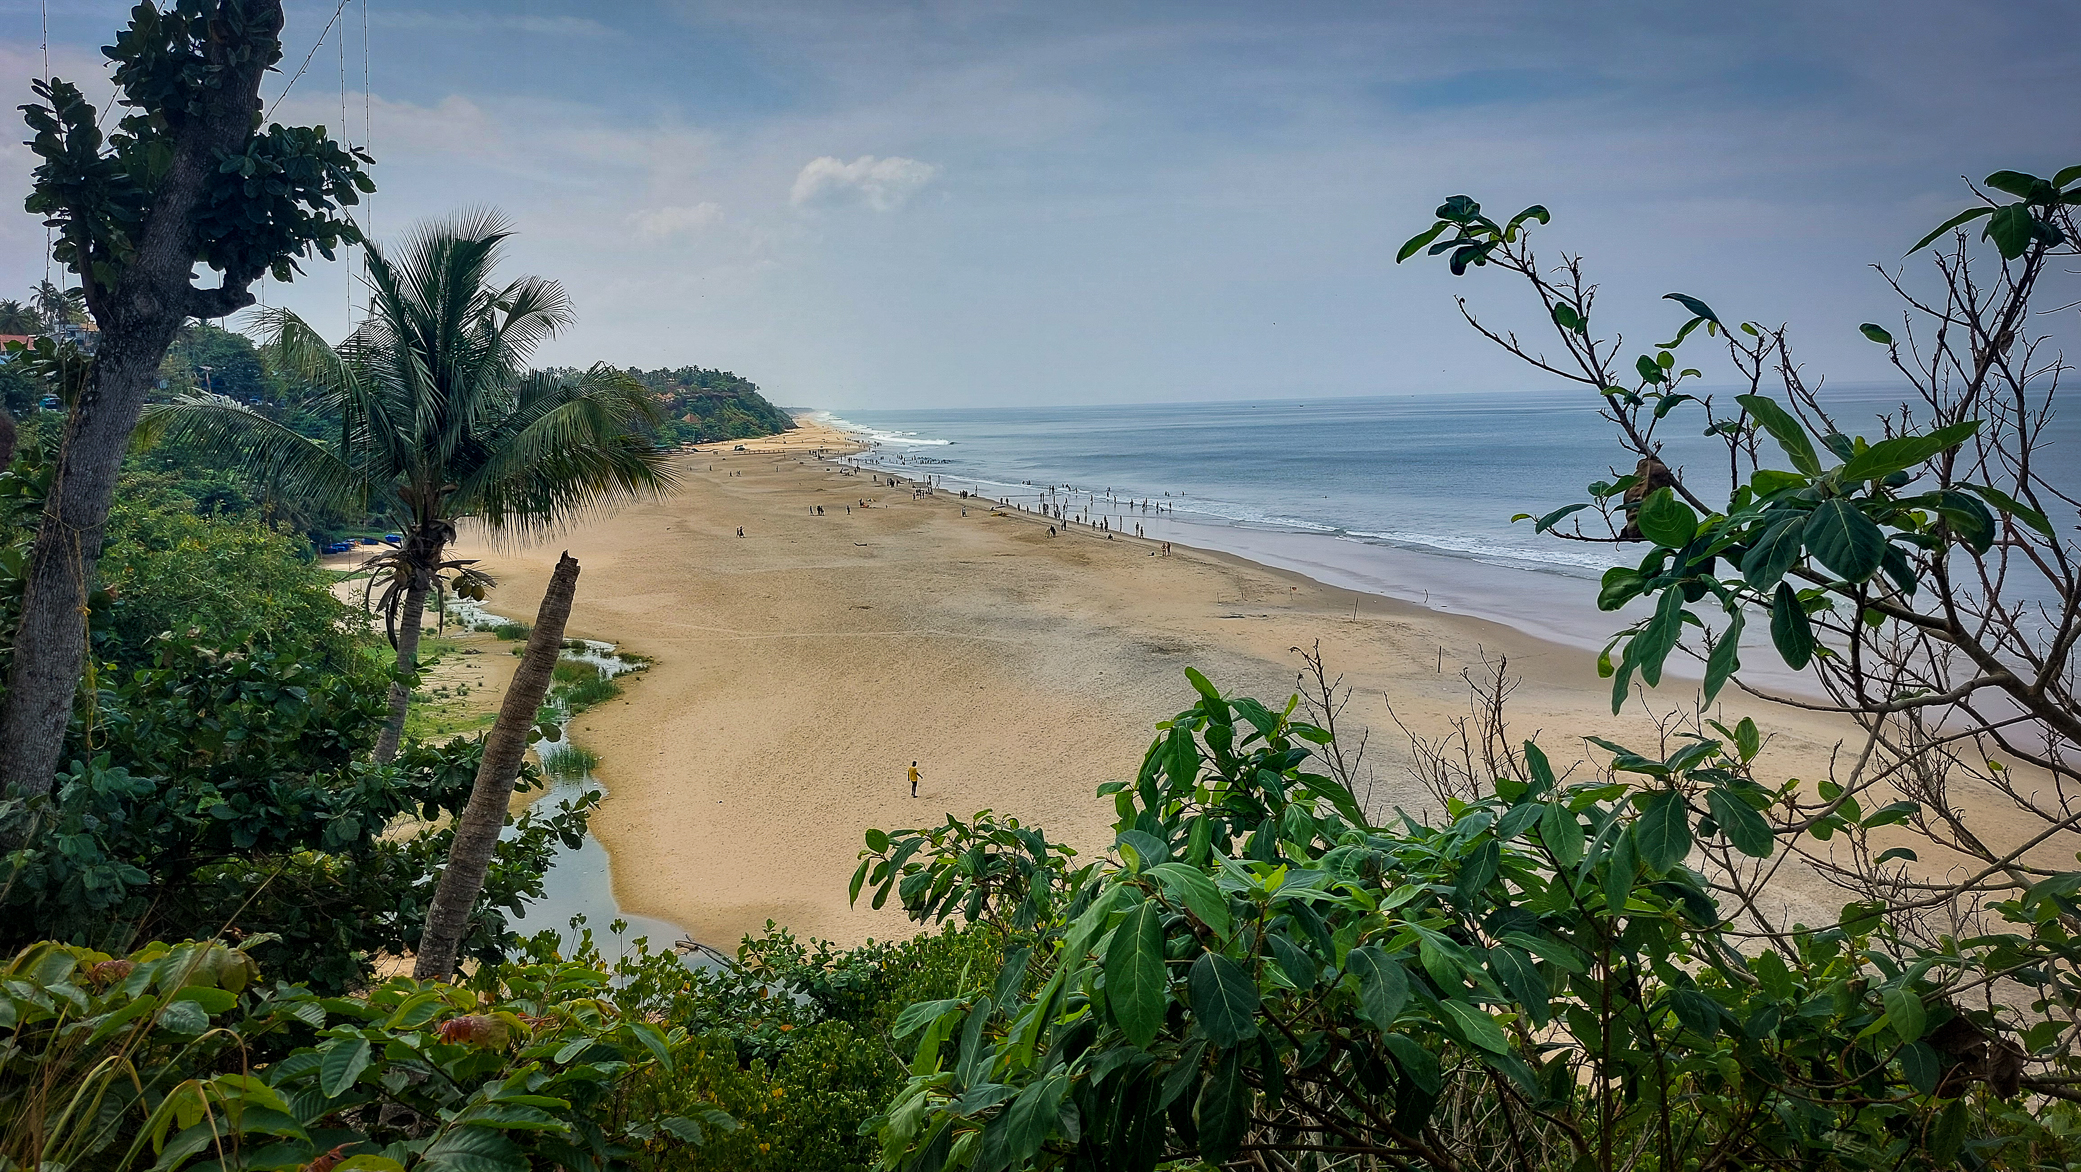 <span  class="uc_style_uc_tiles_grid_image_elementor_uc_items_attribute_title" style="color:#ffffff;">The beach of 'Varkala' in the state 'Kerala' (south-west coast)</span>